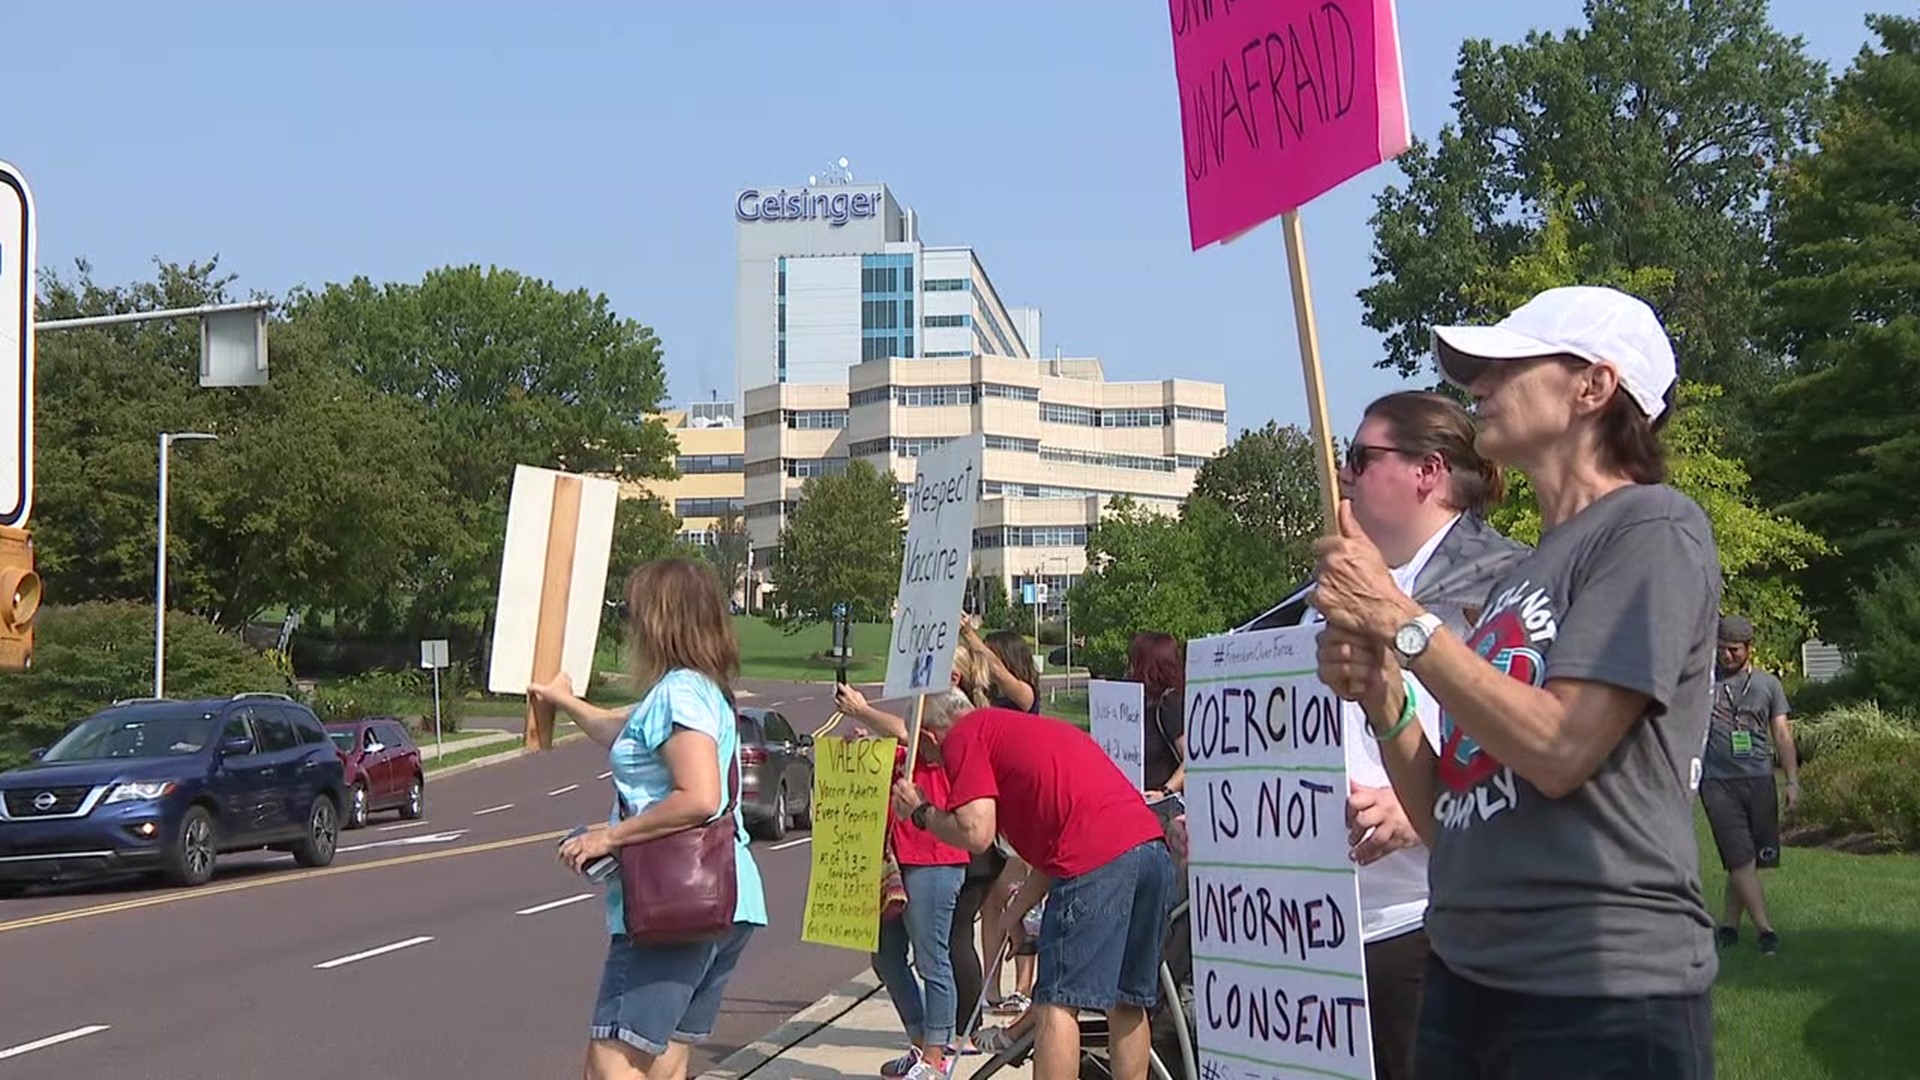 The rally took place Tuesday morning outside the medical center in Danville.